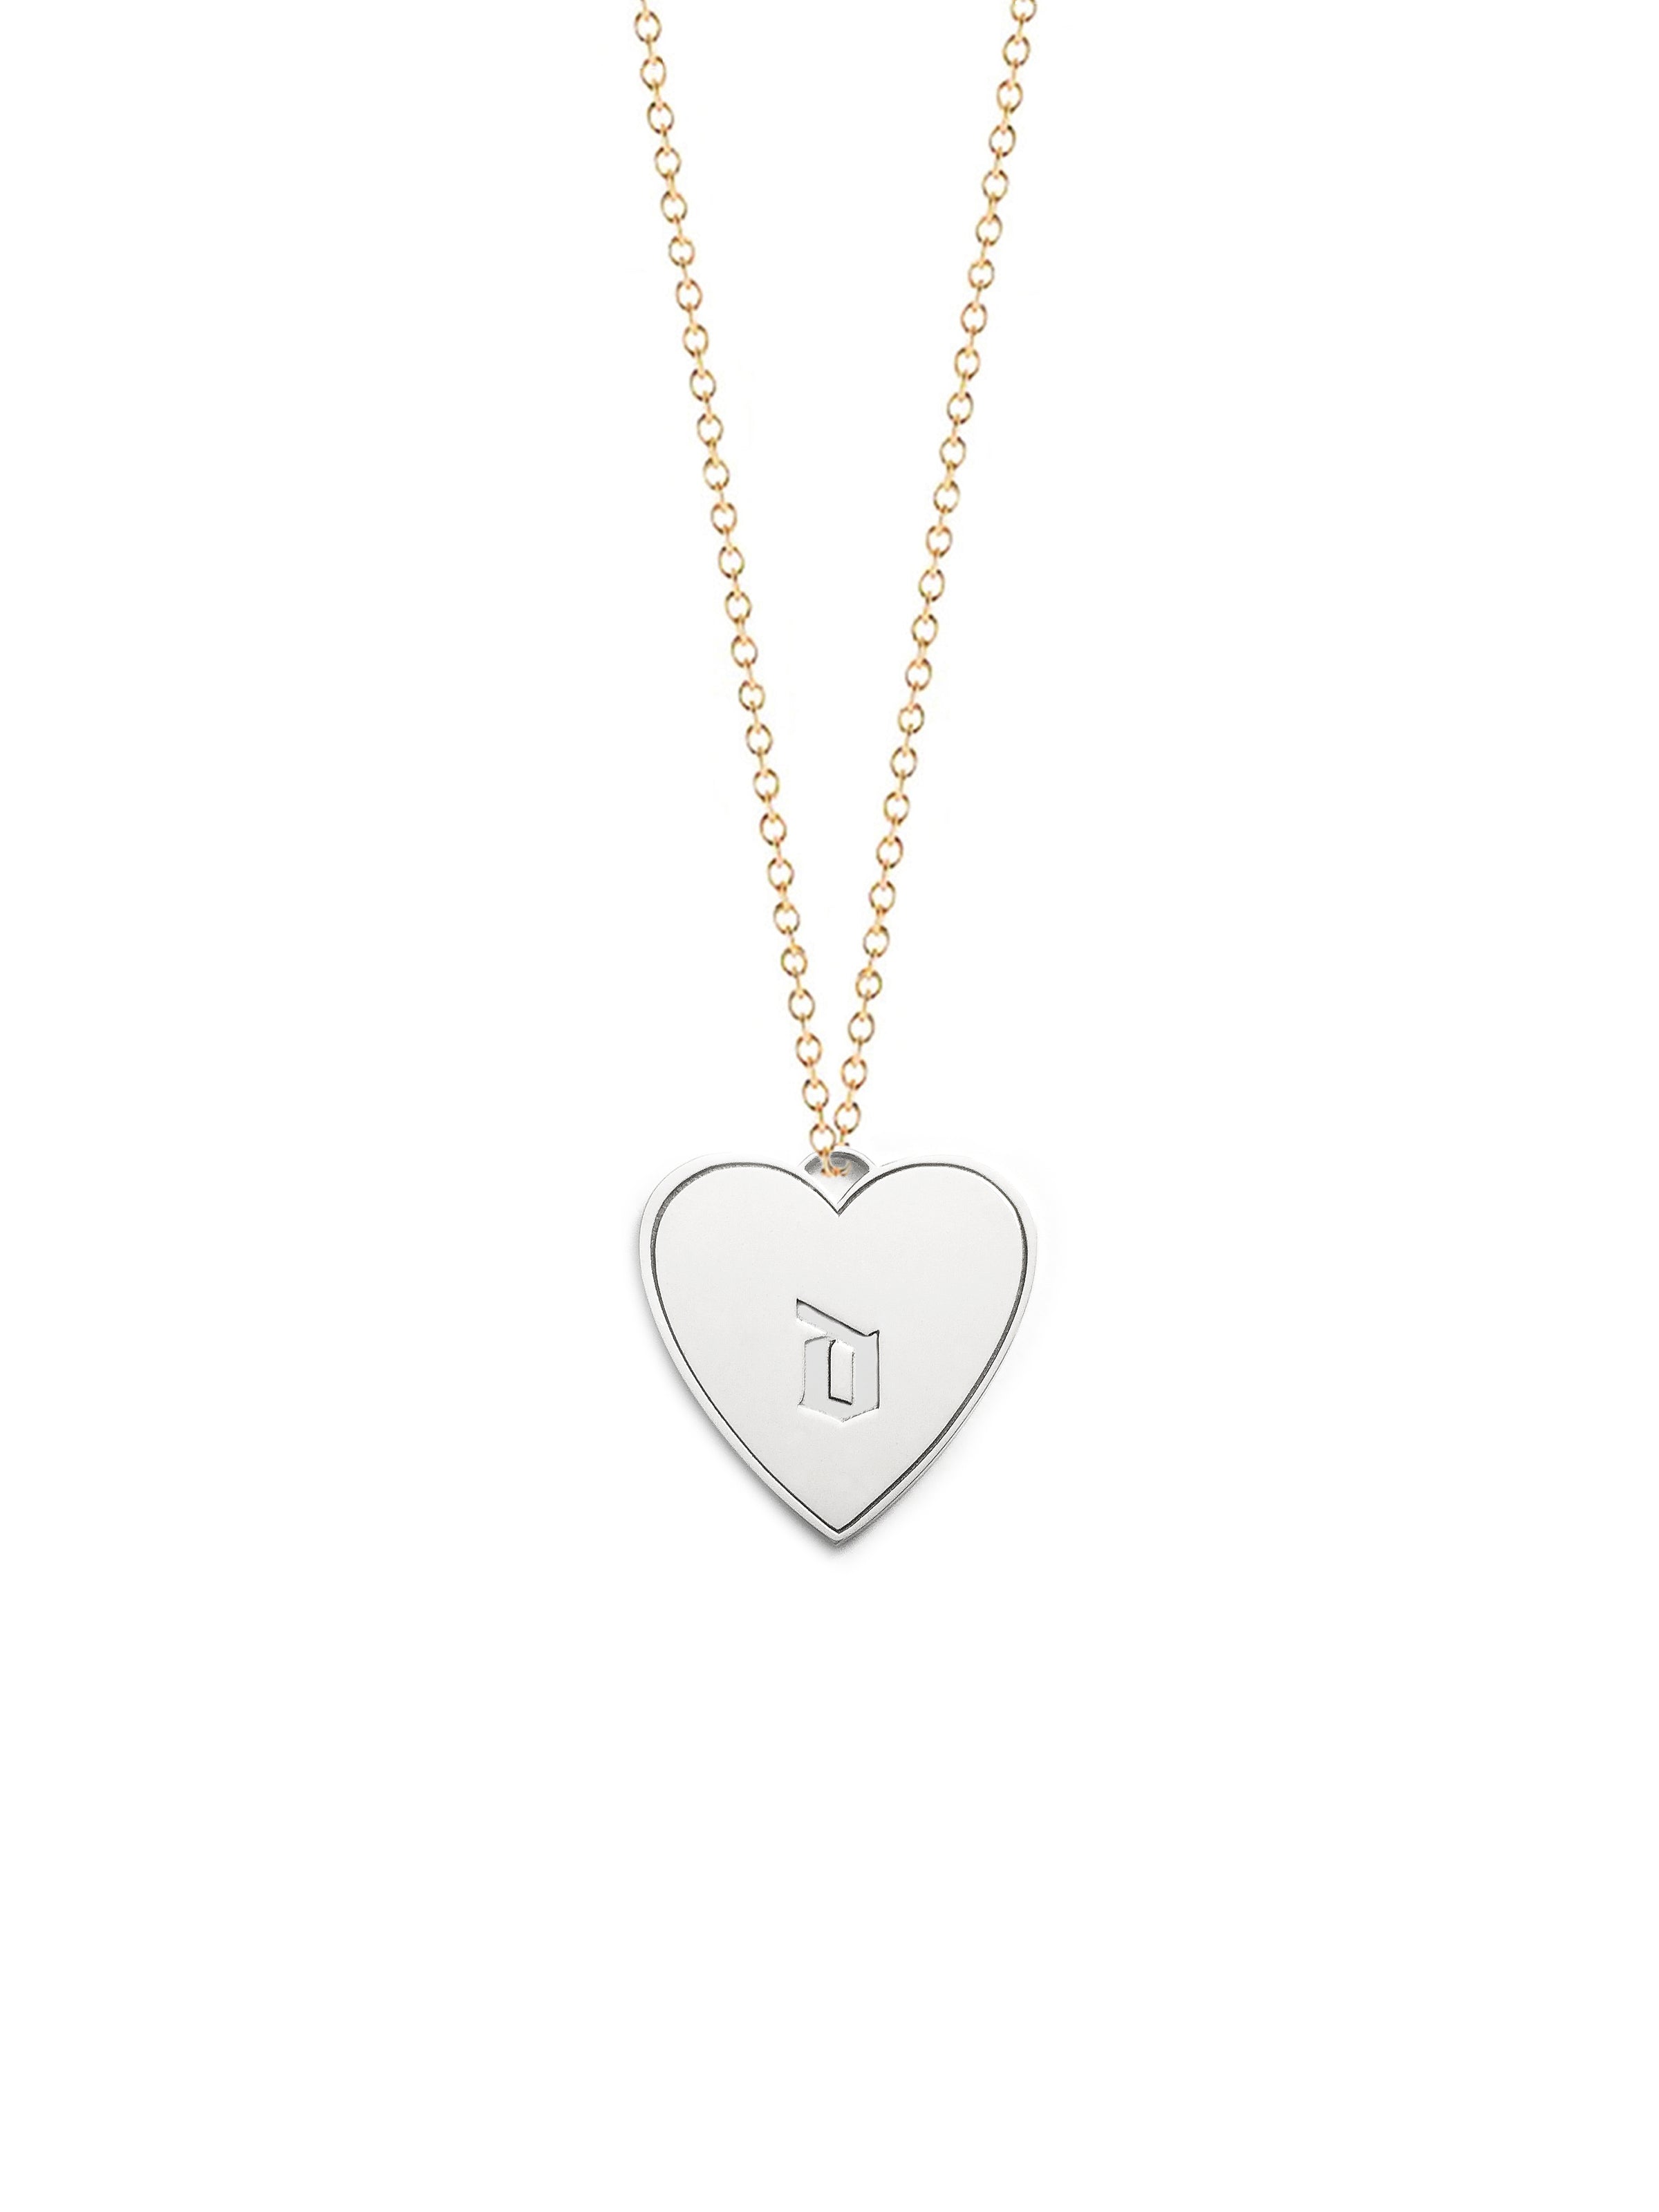 Ivy Heart Medallion Initials Necklace